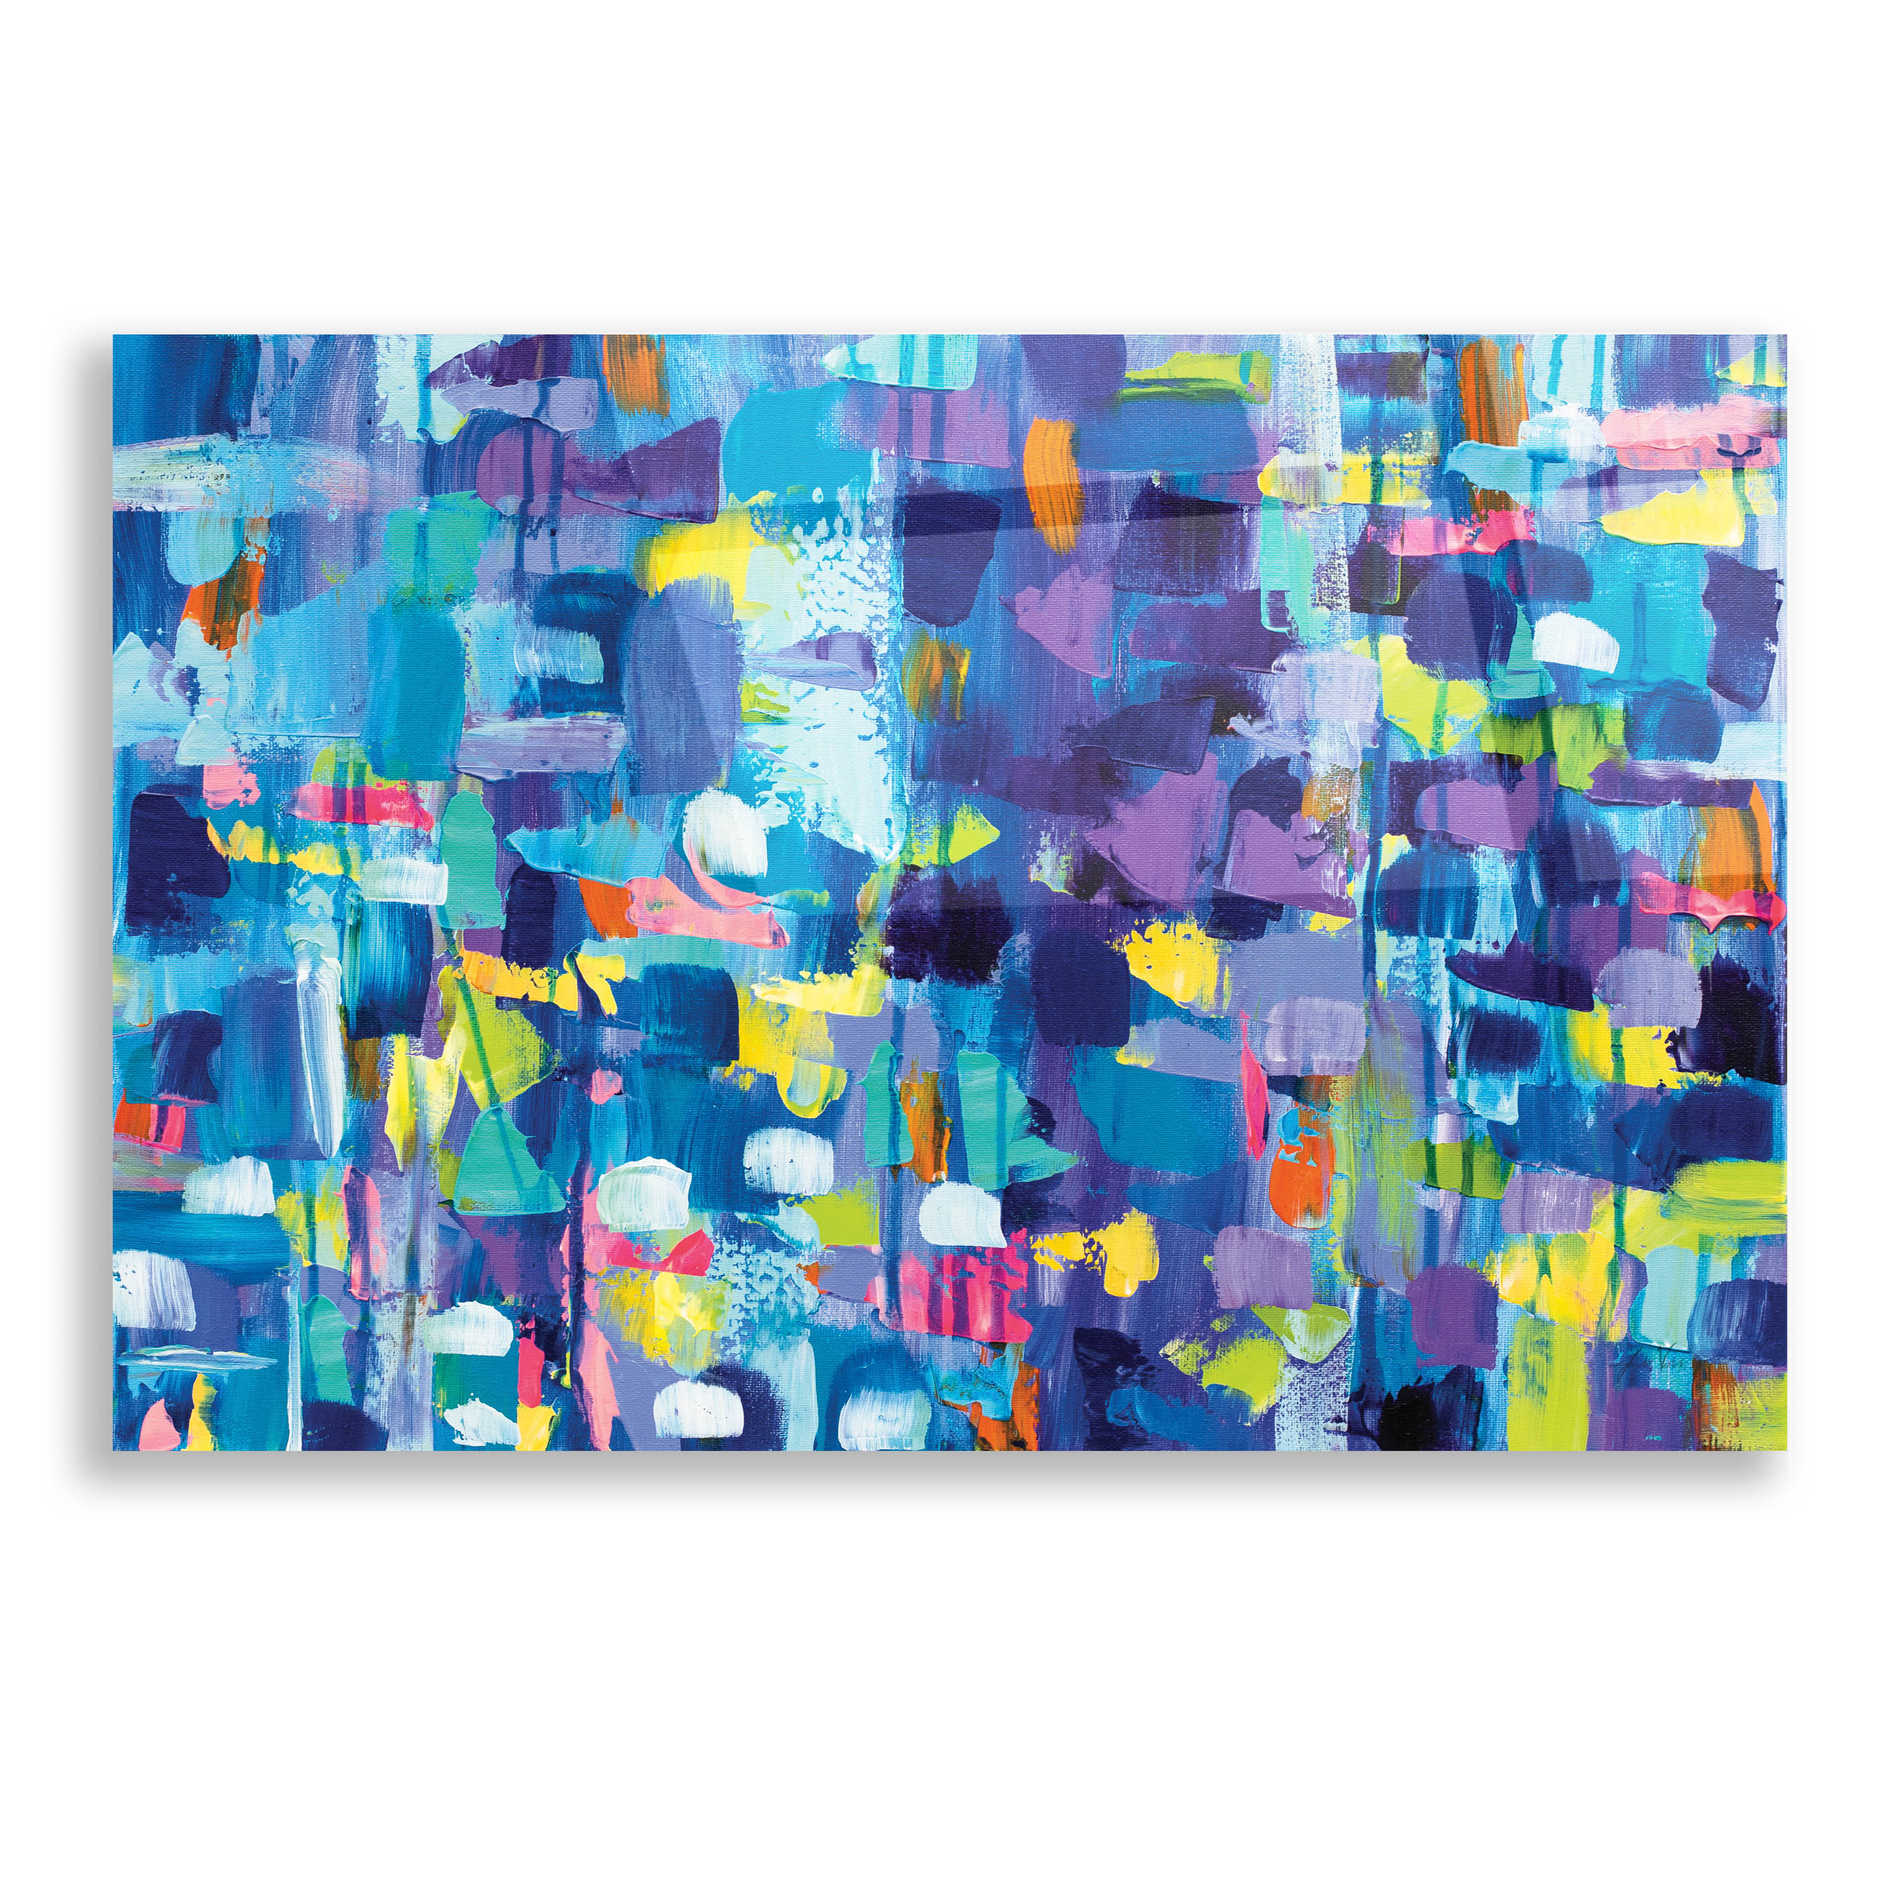 Epic Art 'Gaiety' by Jeanette Vertentes, Acrylic Glass Wall Art,16x12